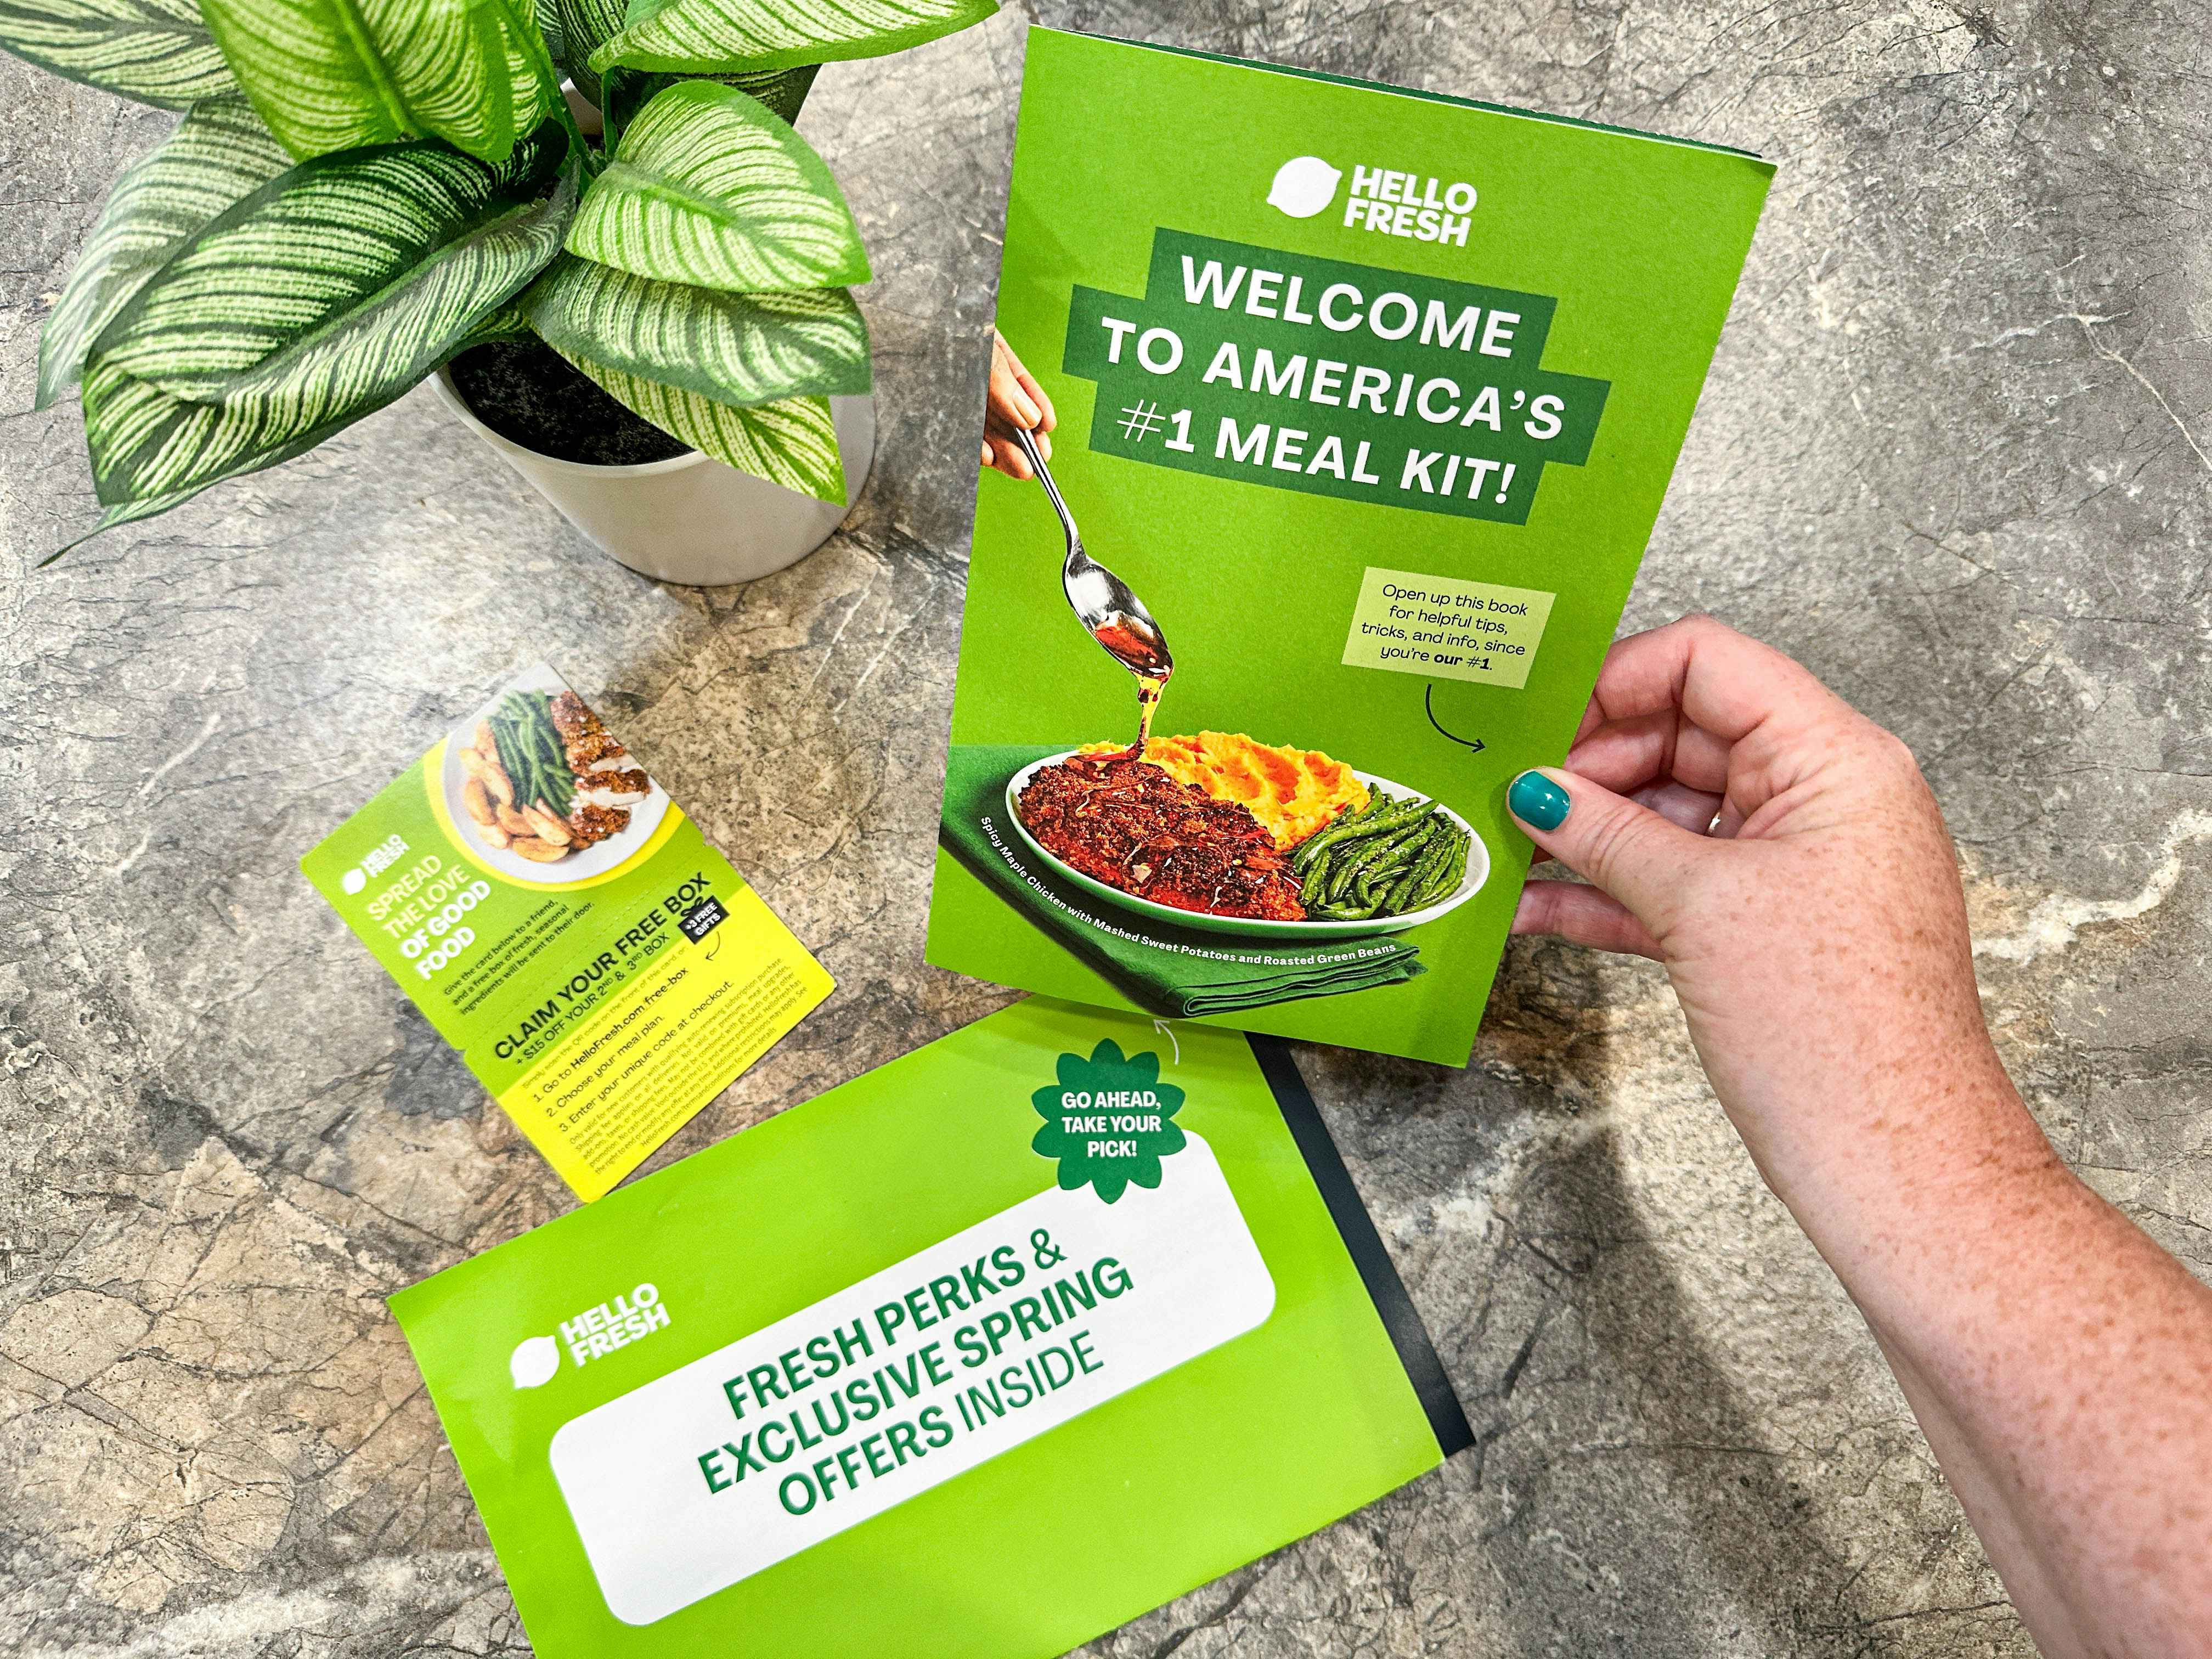 hello fresh coupons from box kit on counter 